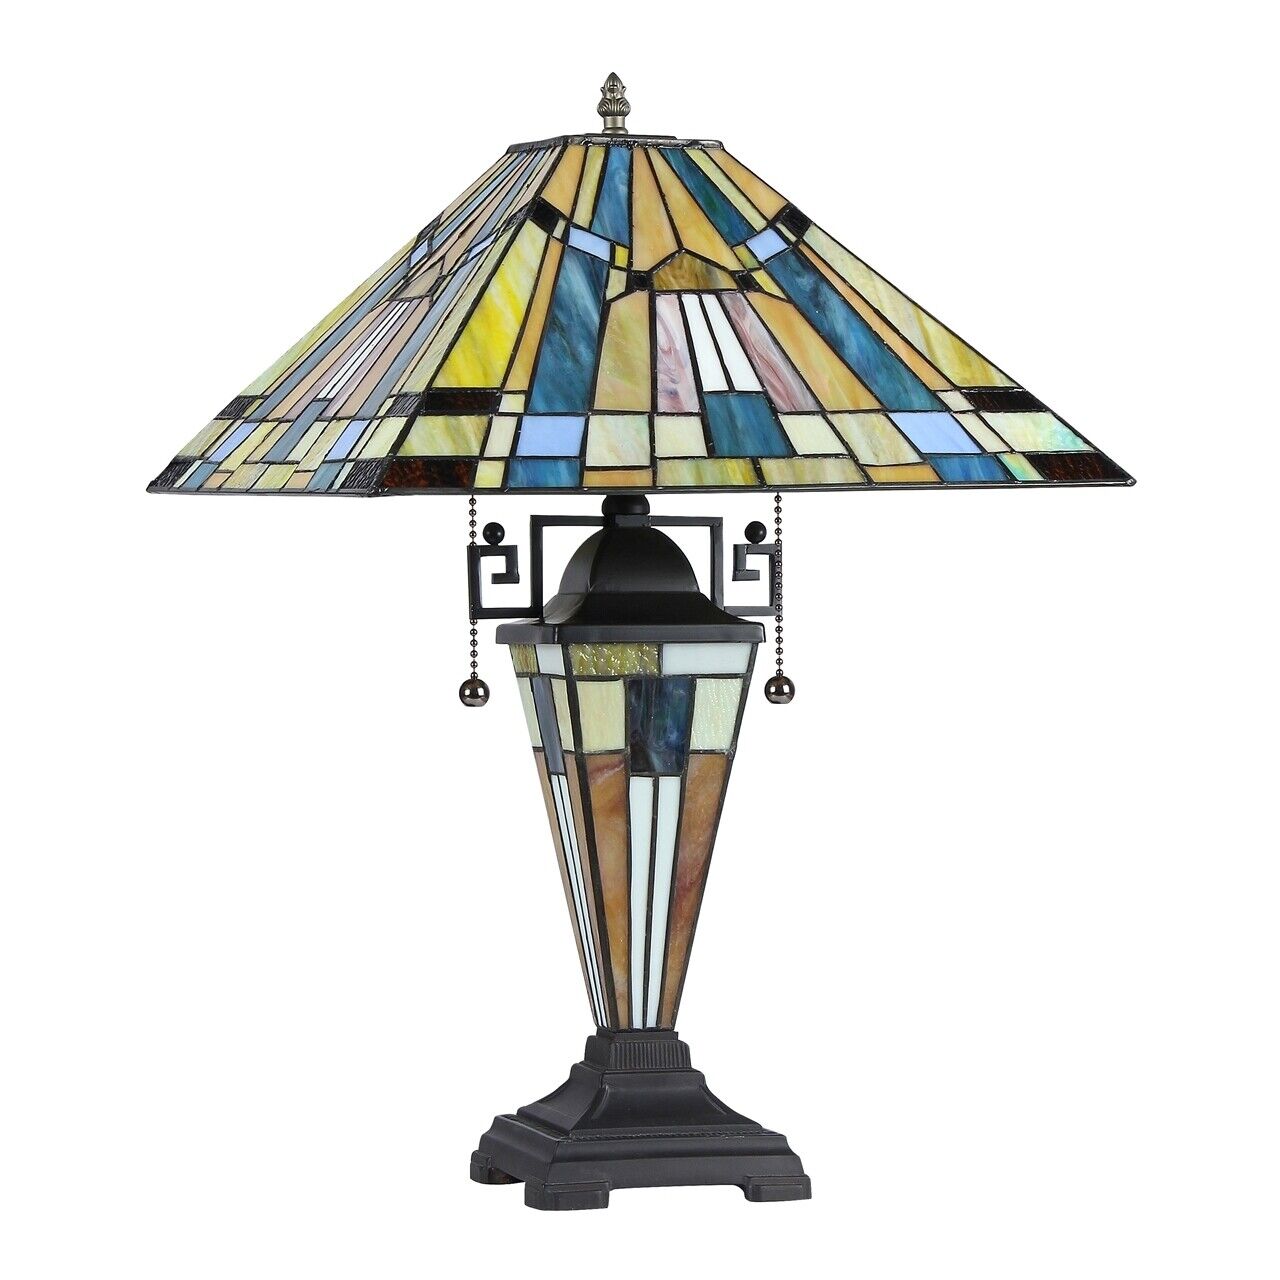 23.2" Antique Vintage Style Lighted Base Stained Glass Mission Table Lamp